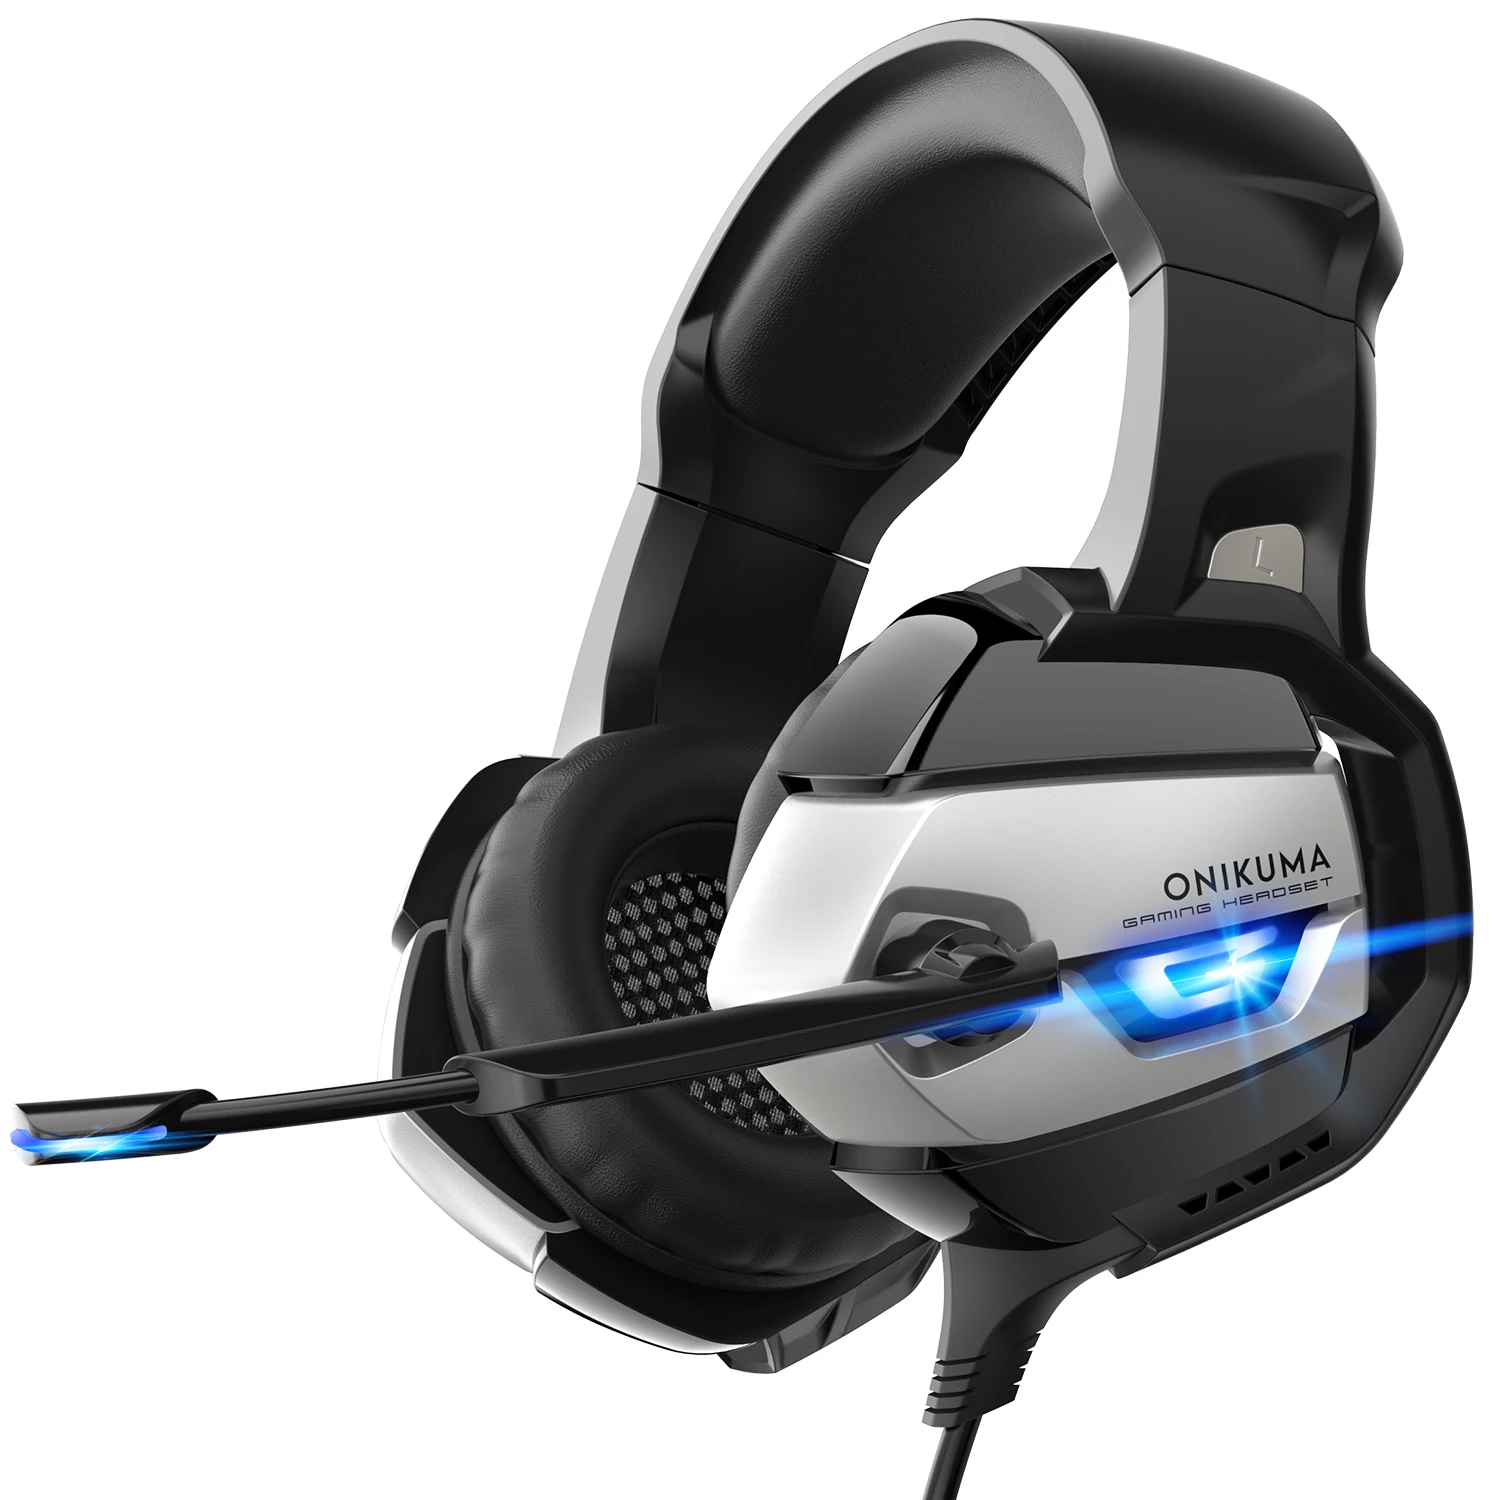 

High Quality ONIKUMA K5 headset for game stereo Glowing gaming headphone overhead Wired stereo,headset with mic for computer